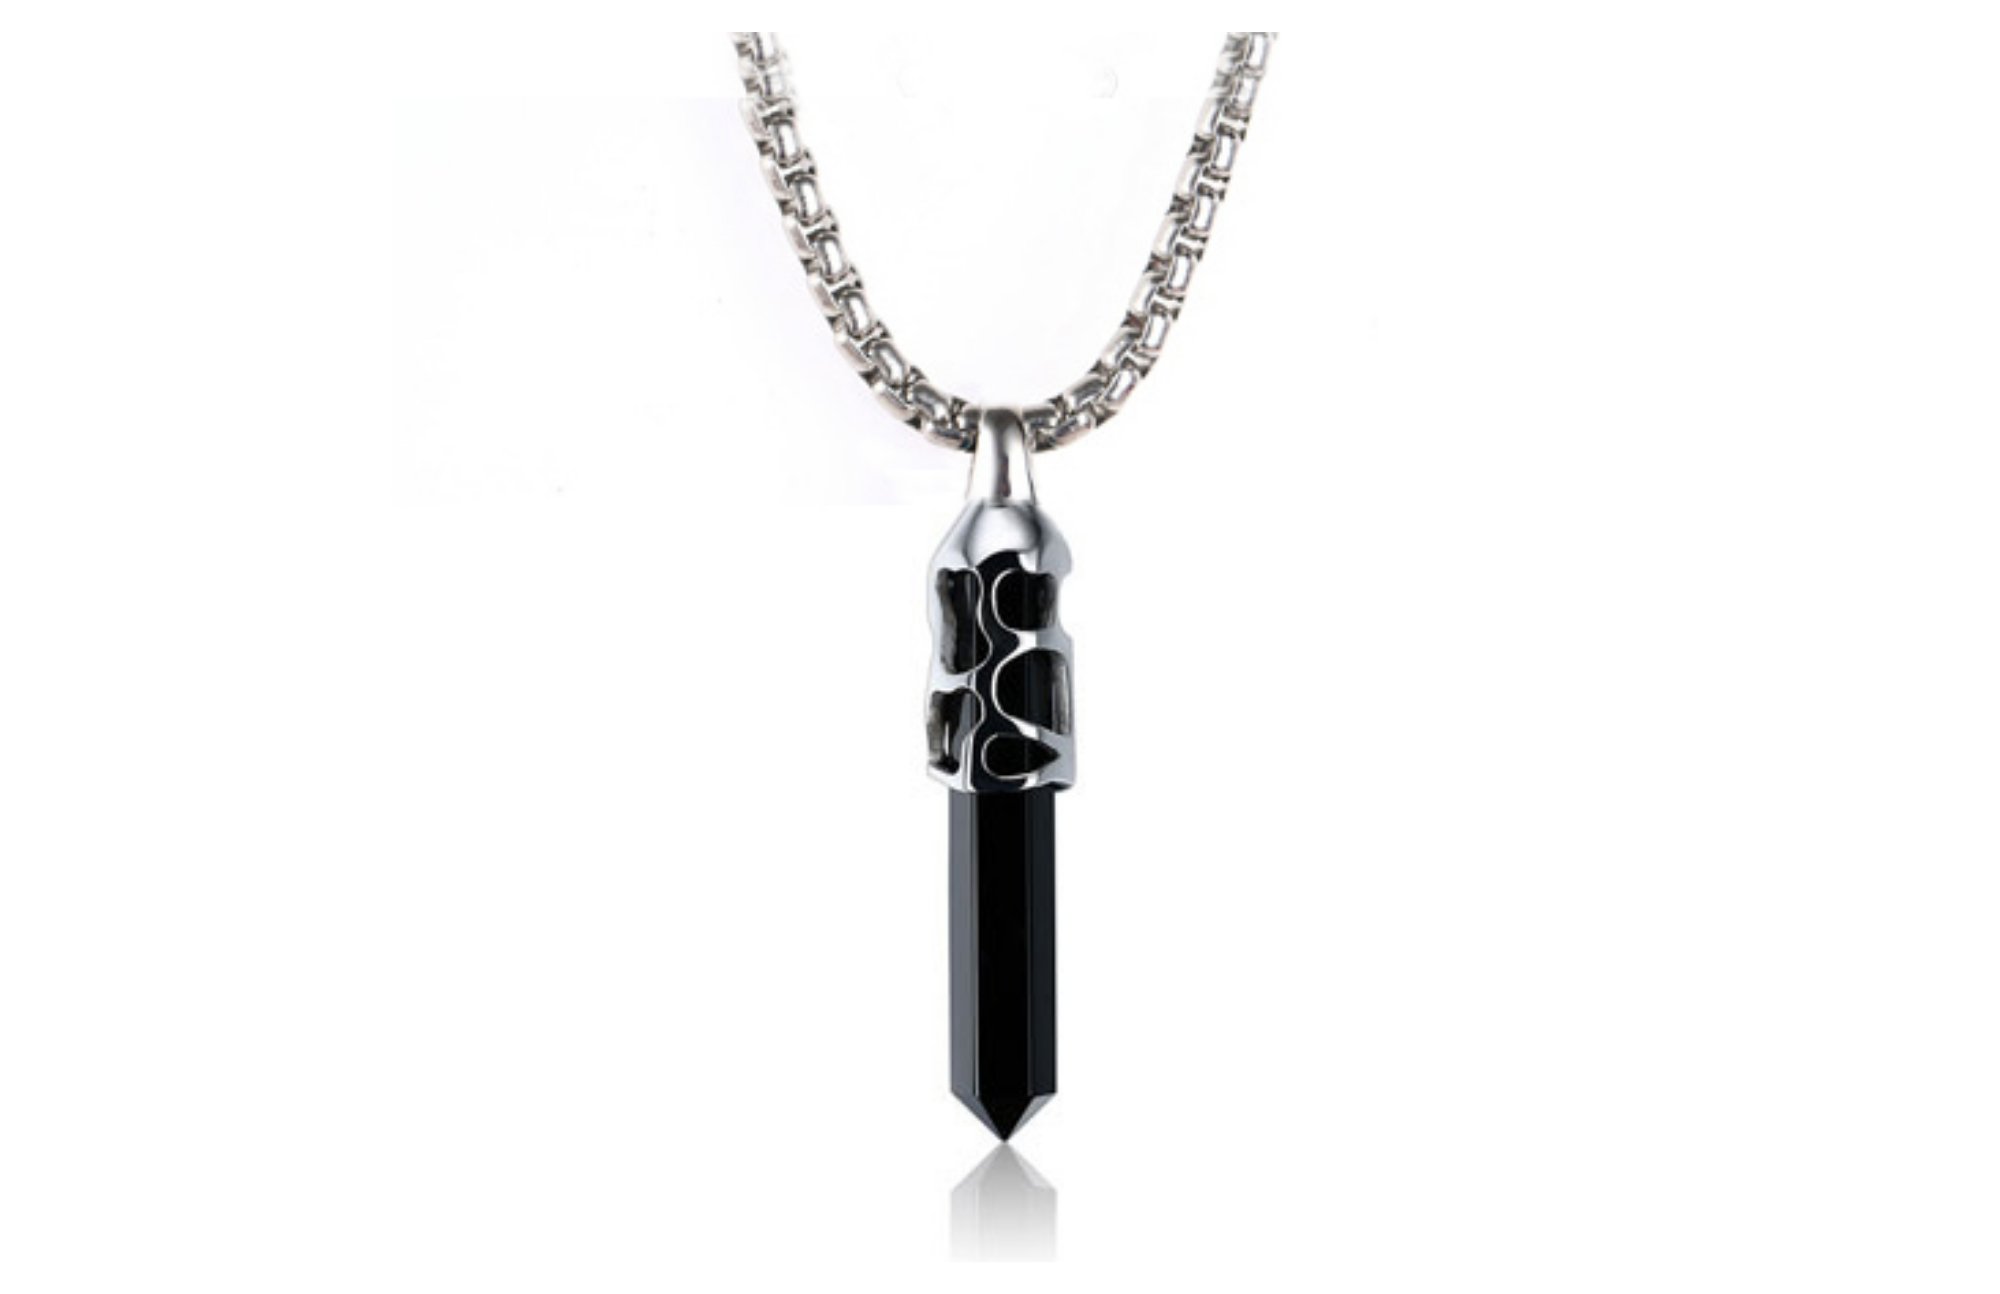 Elongated black onyx pendant attached on a stainless steel lace